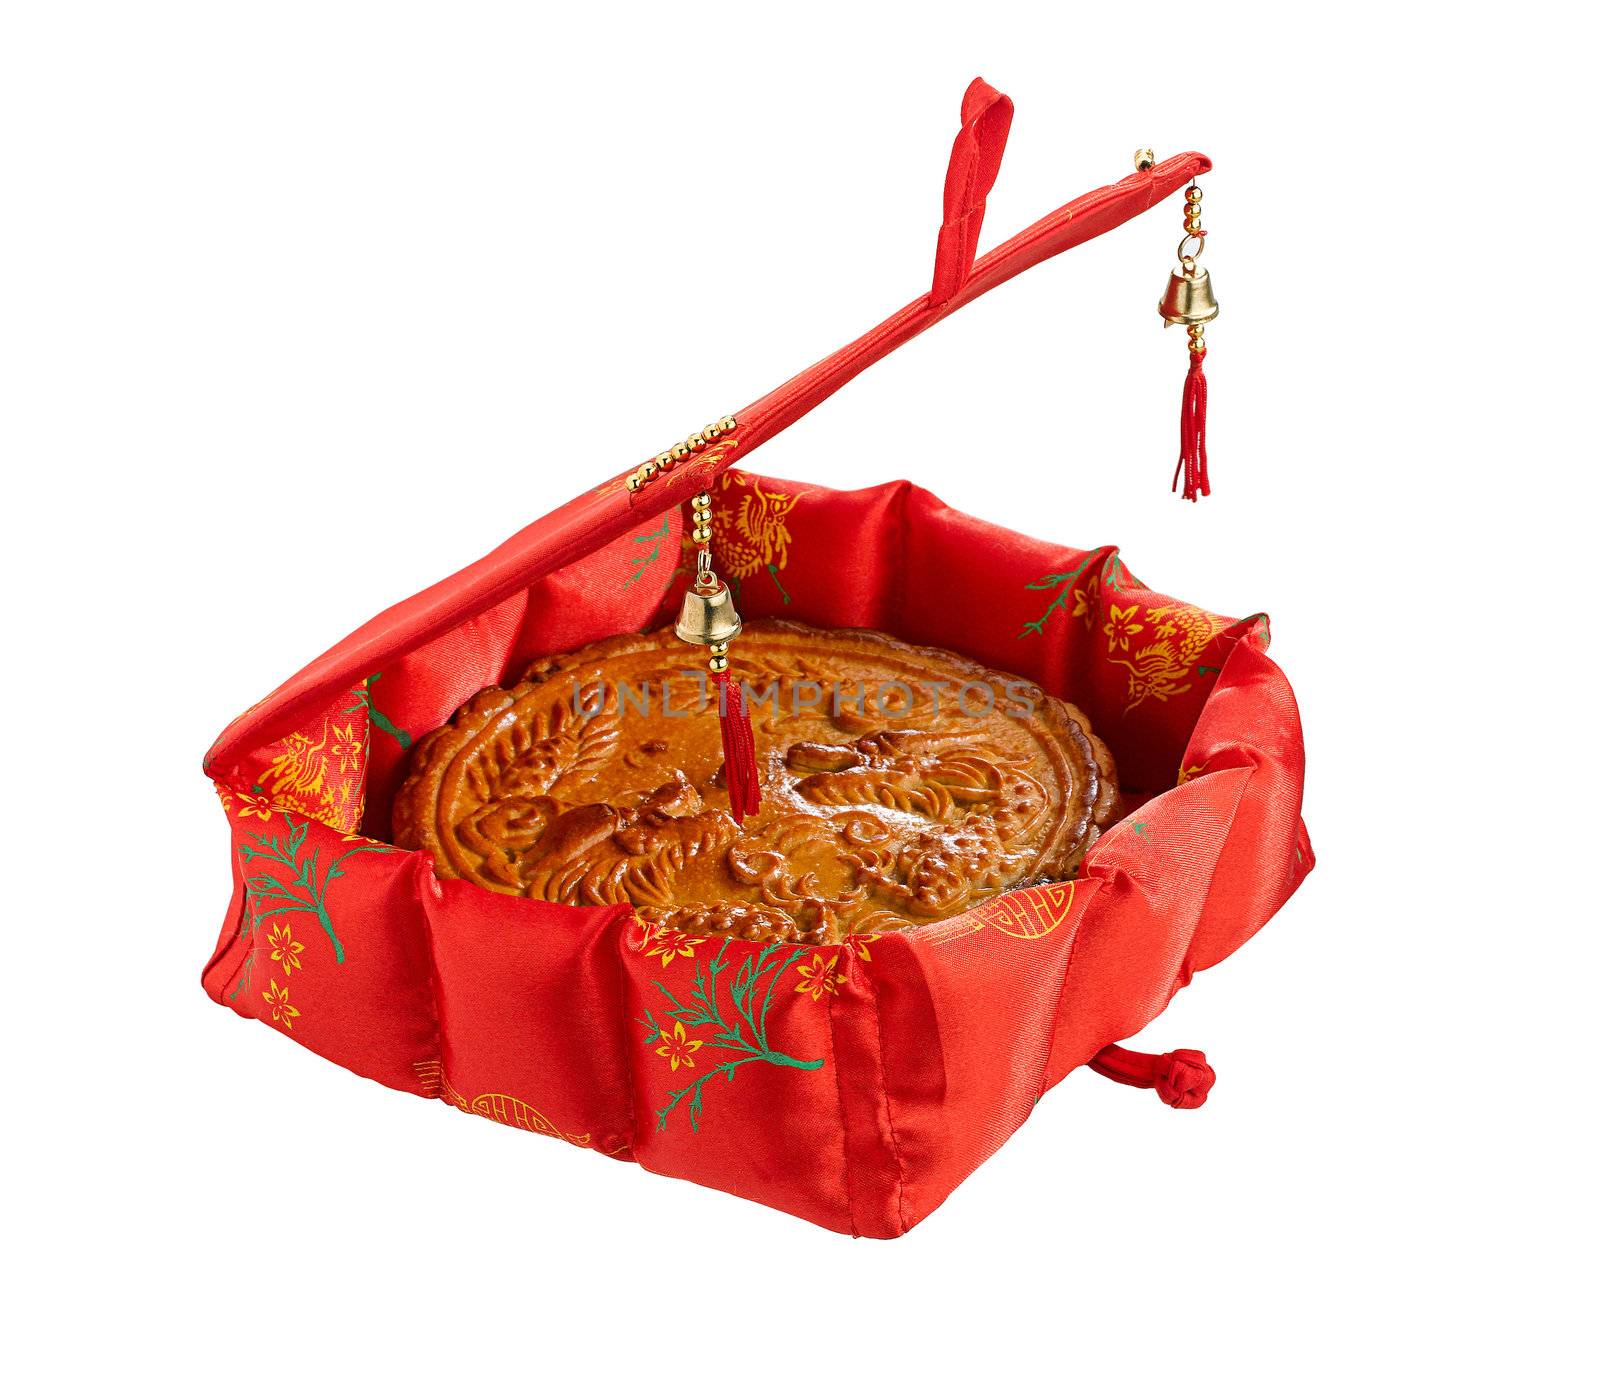 moon cake in the pretty gift box for Chinese new year festival